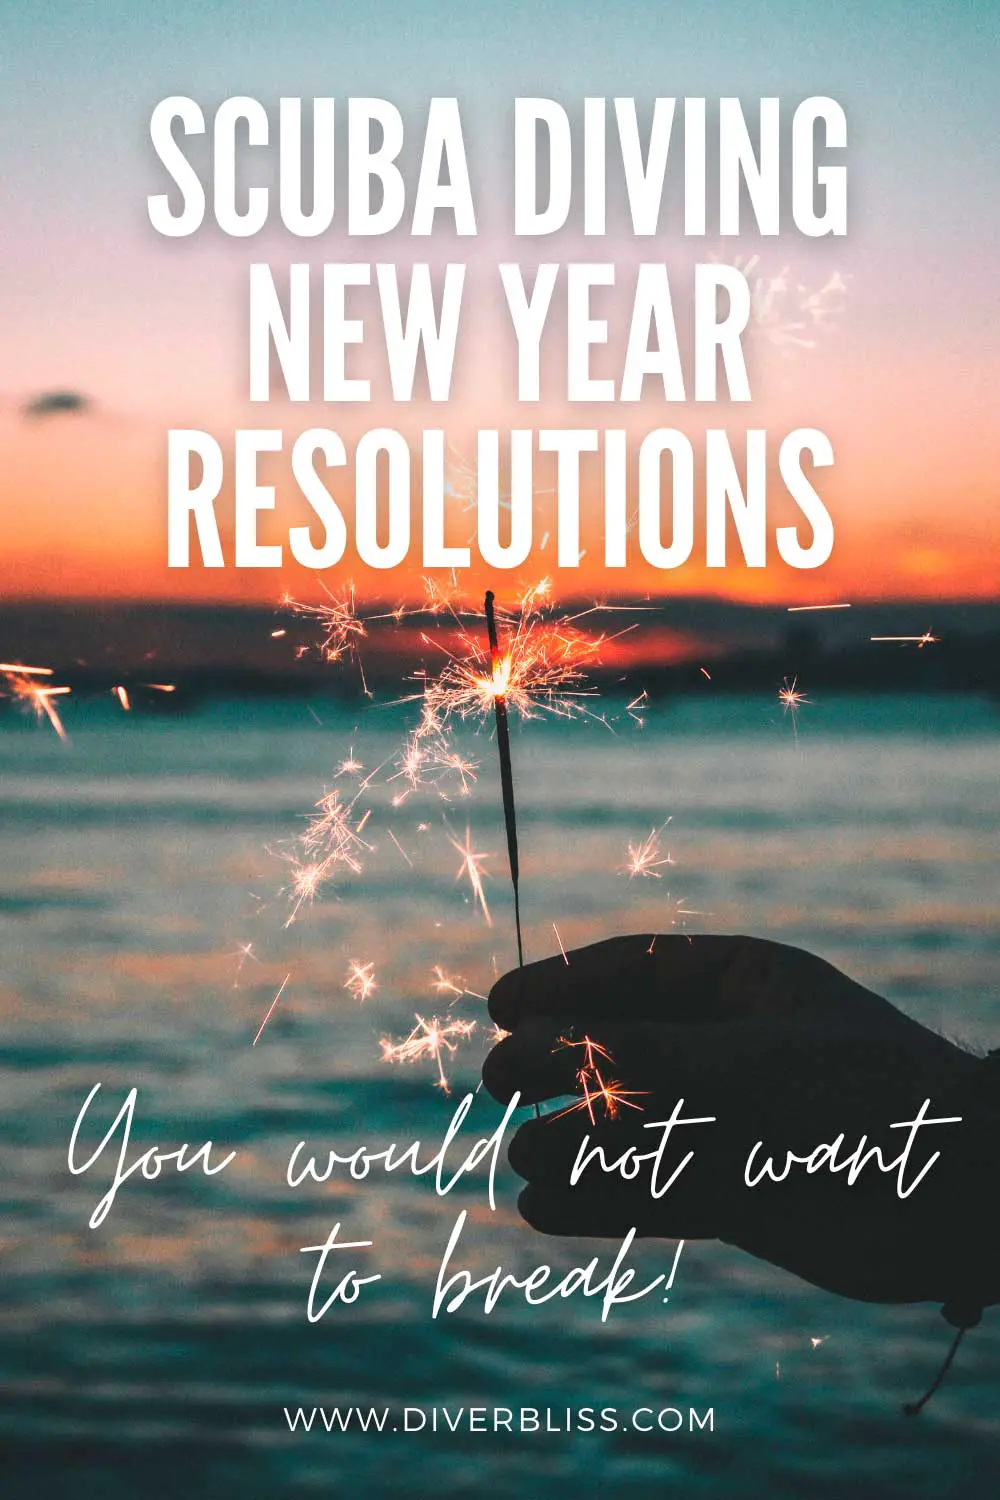 Scuba Diving New Year Resolutions You would not want to break